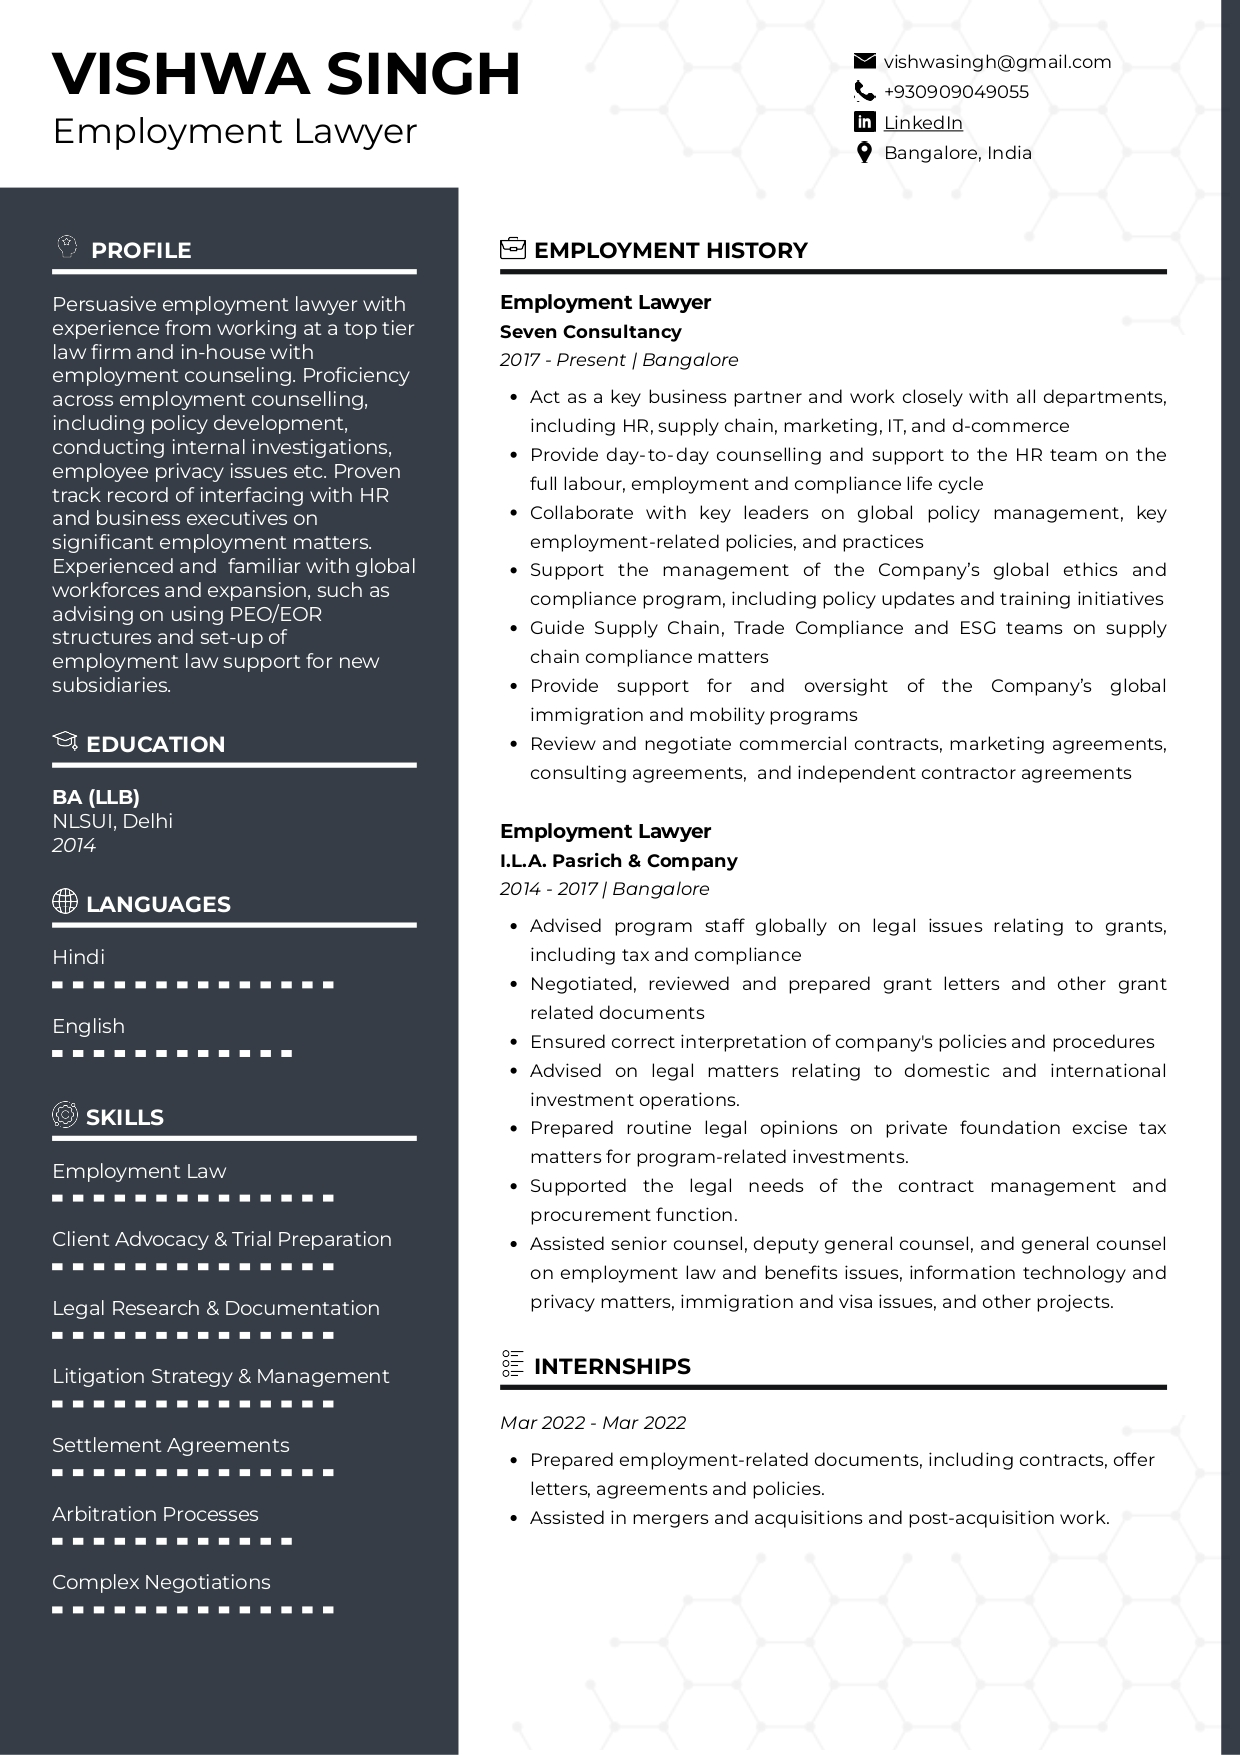 Resume of Employment Lawyer built on Resumod